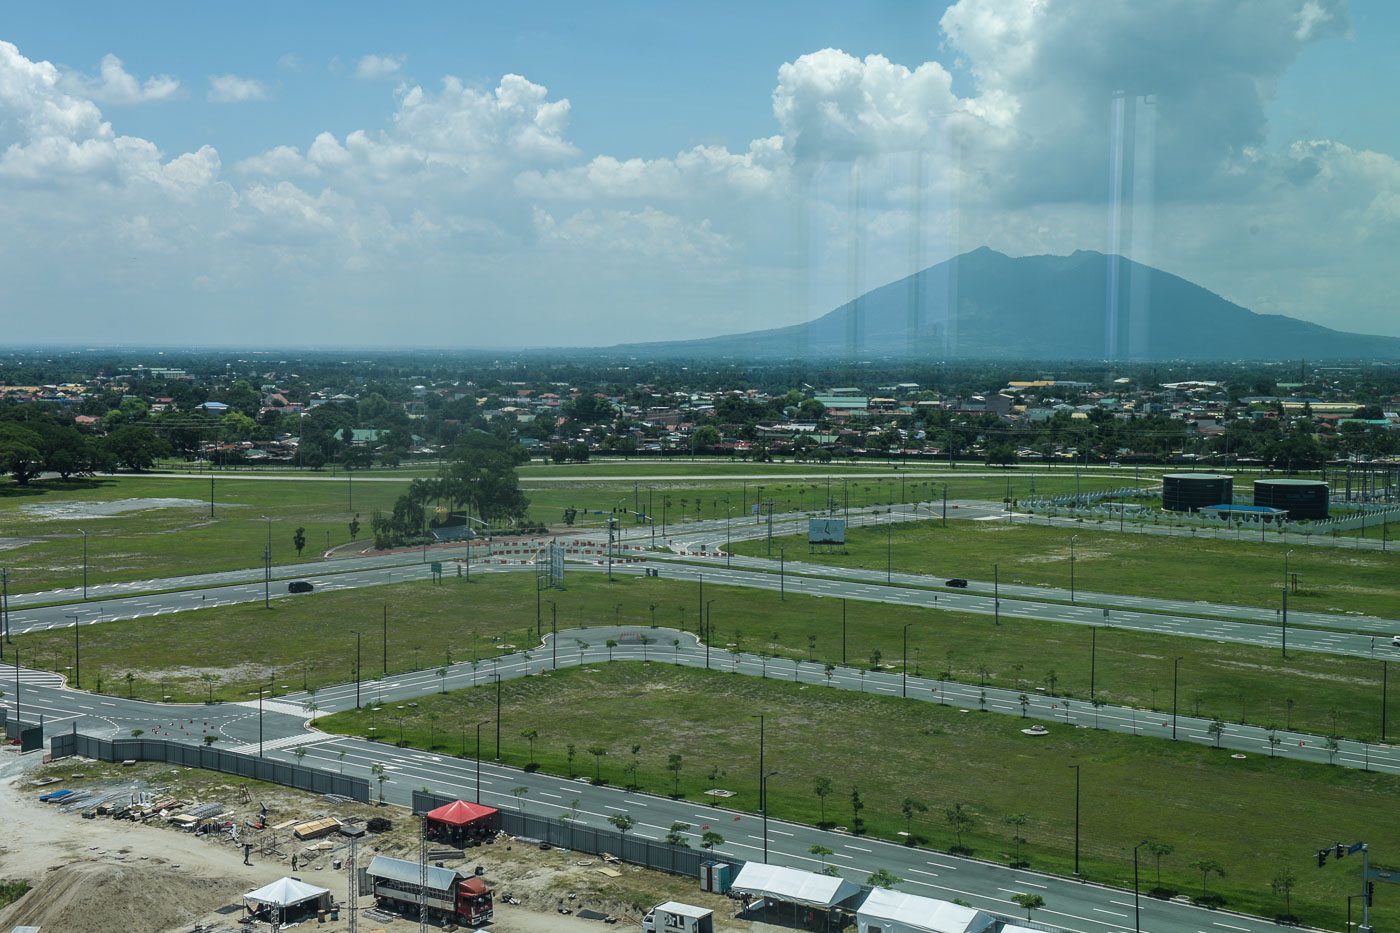 SCENIC VIEW. Mount Arayat, as seen from one of the buildings in Clark Global City. Photo by LeAnne Jazul/Rappler 